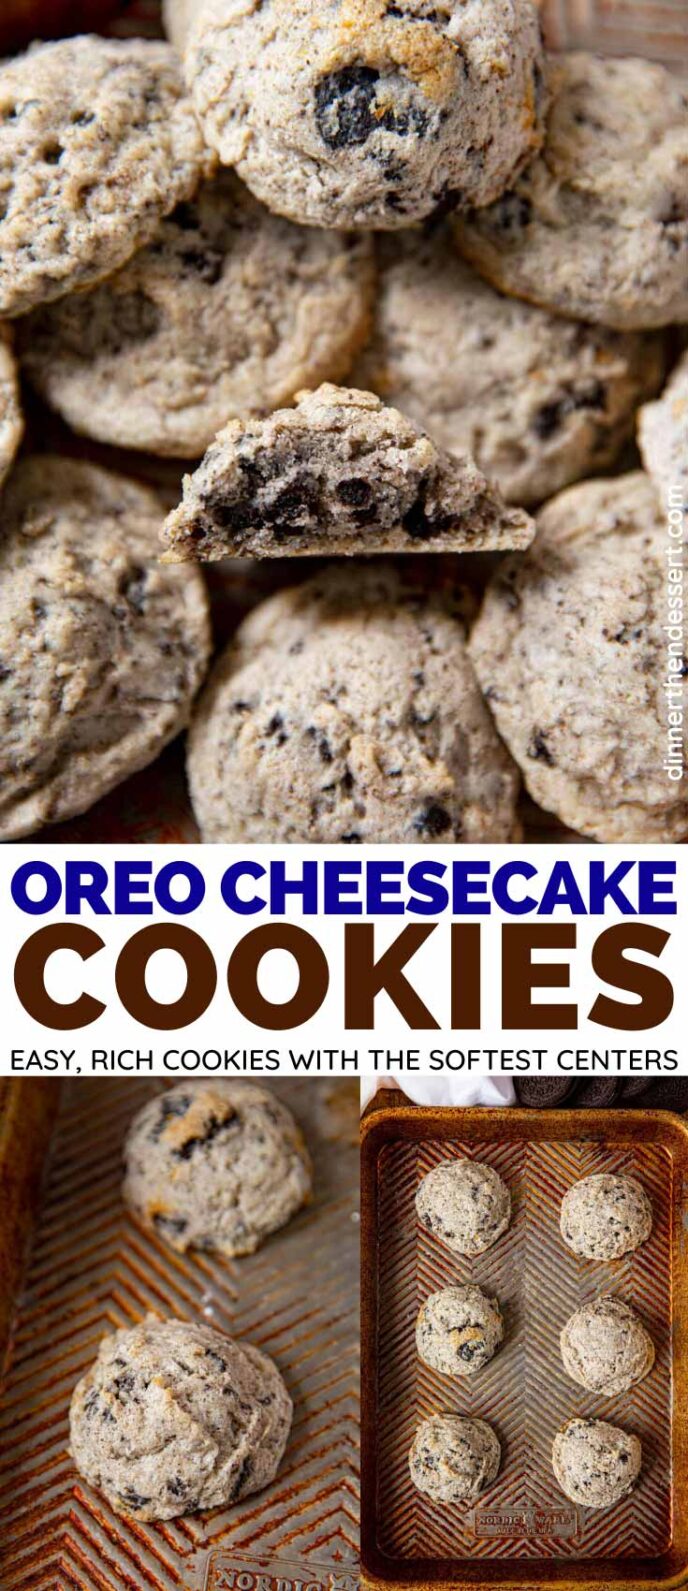 Oreo Cheesecake Cookies collage